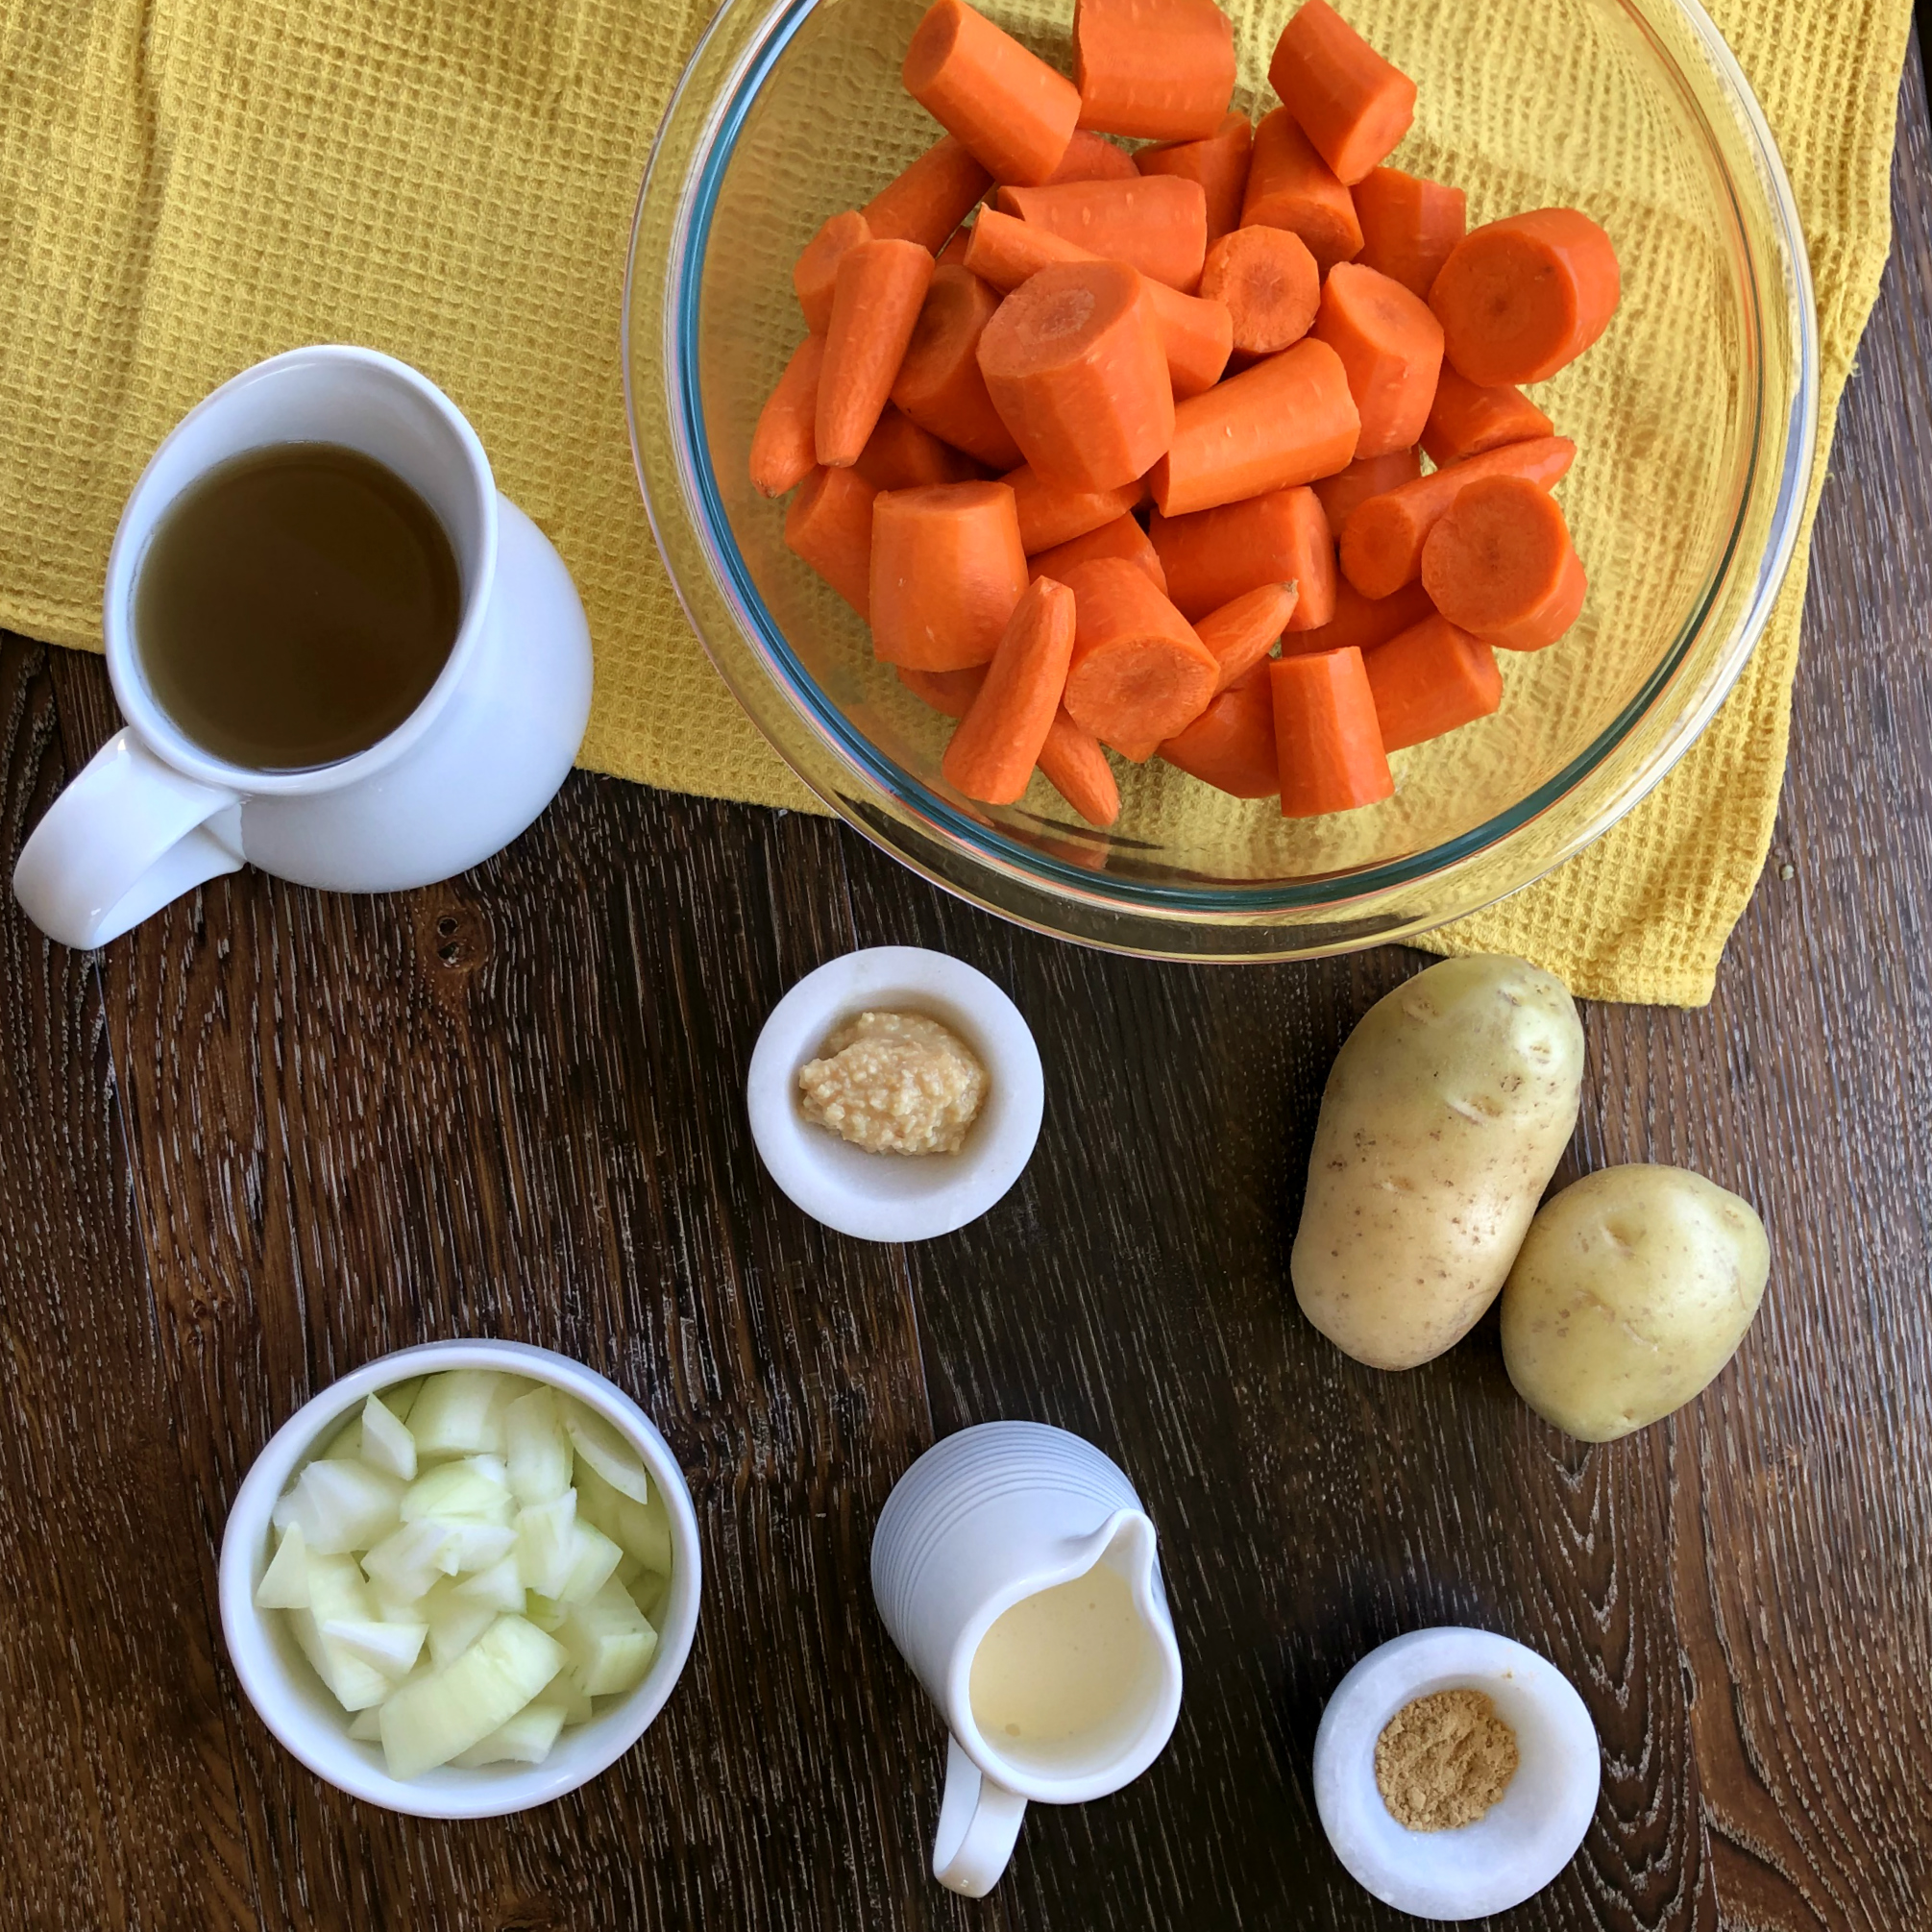 Ingredients for Carrot & Ginger Soup 